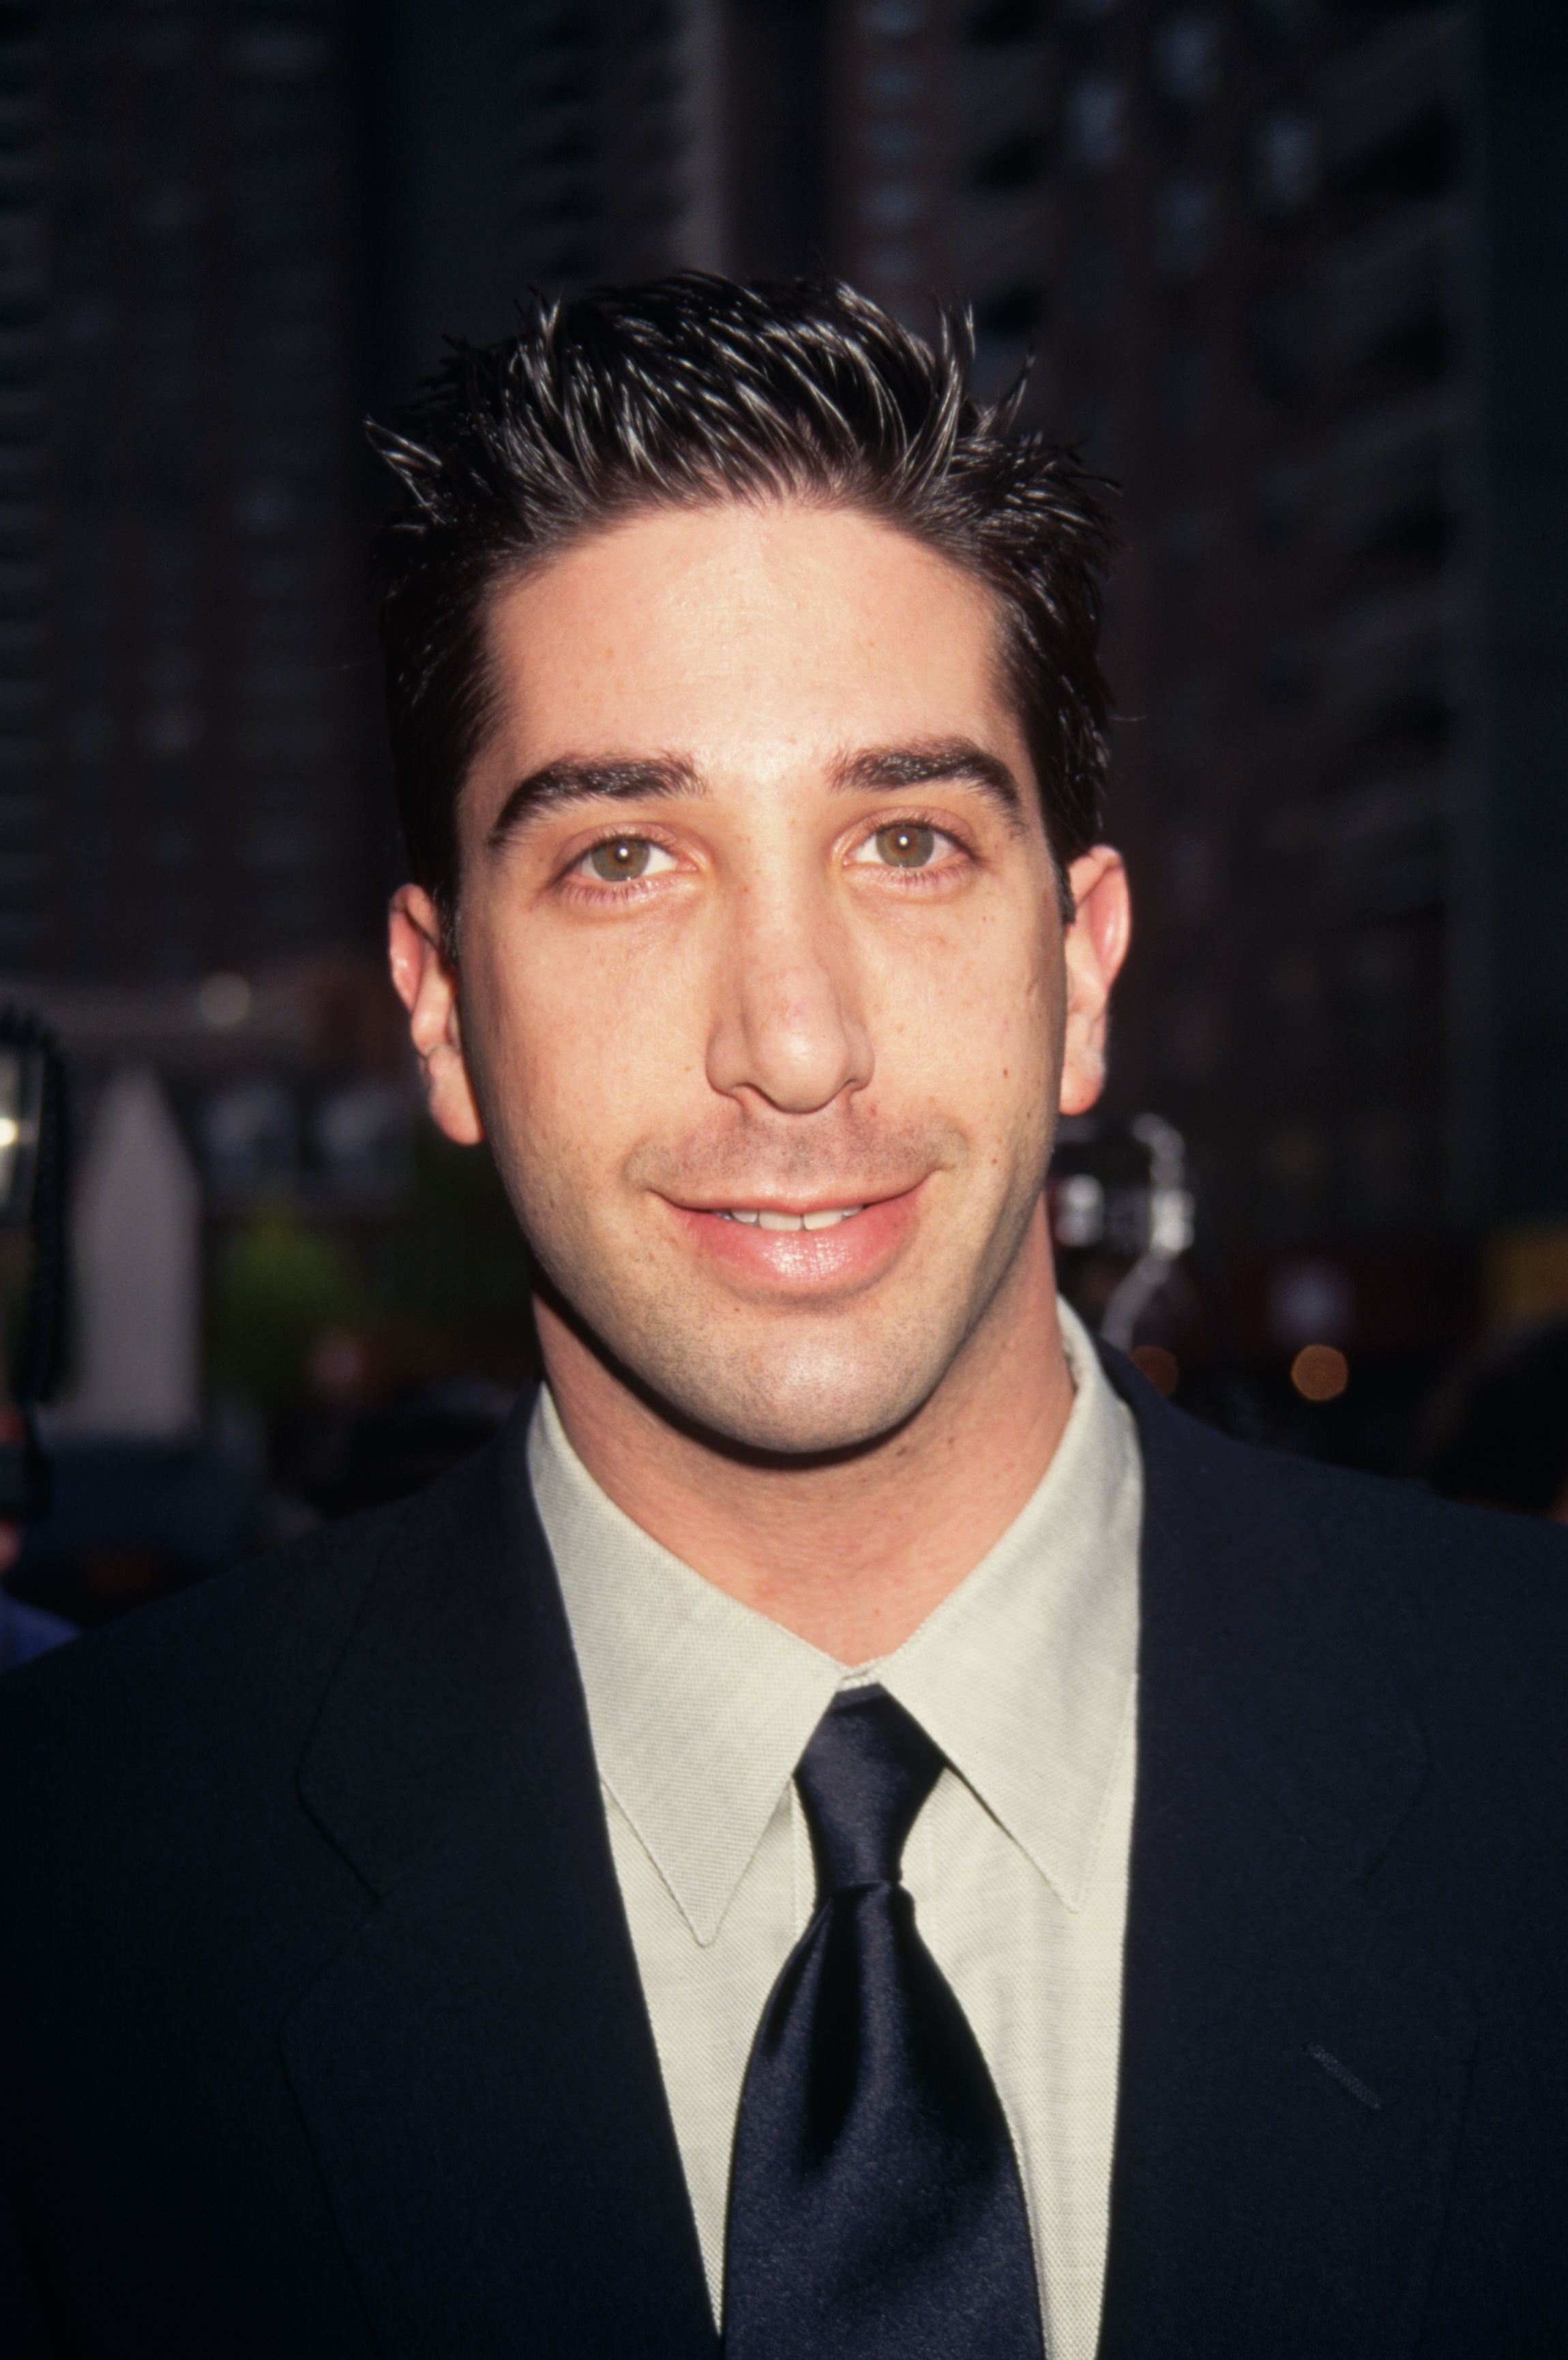 David Schwimmer during the premier of the movie, "The Pallbearer" in 1996 | Source: Getty Images